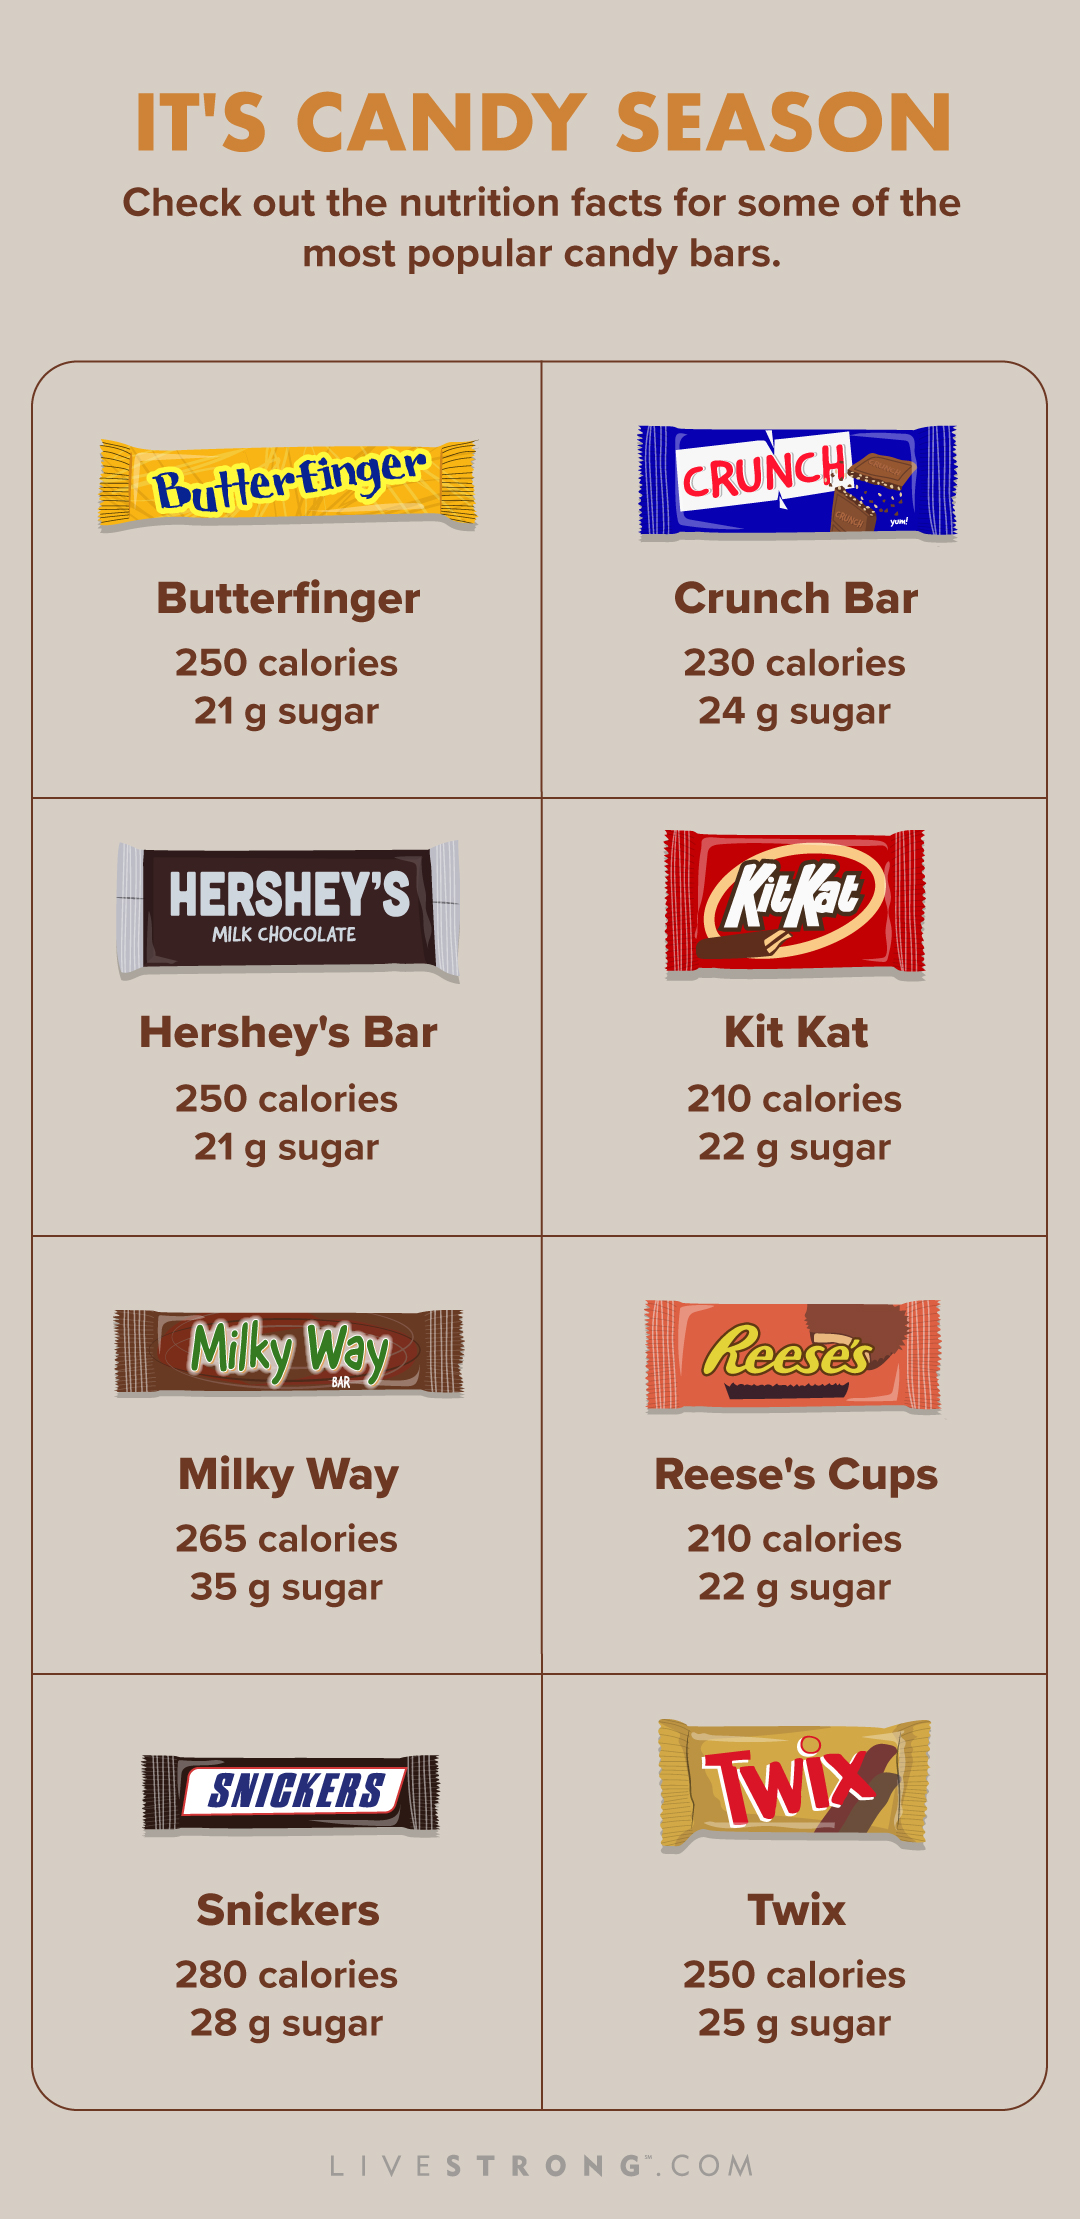 Candy, Definition, Ingredients, & Types